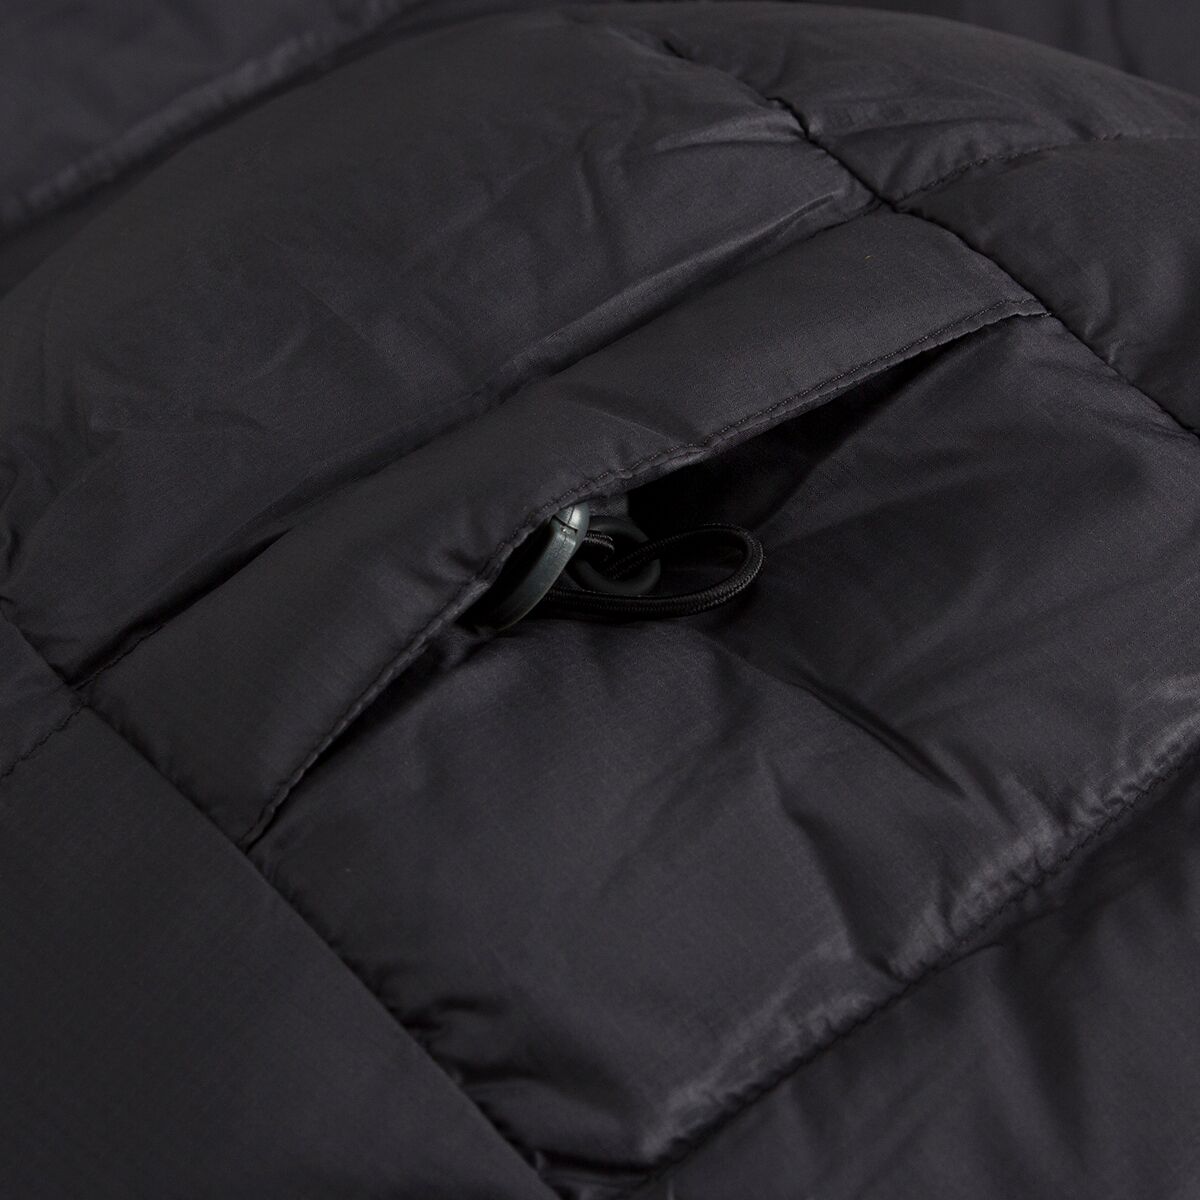 Outdoor Research Transcendent Hooded Down Jacket - Men's | Backcountry.com